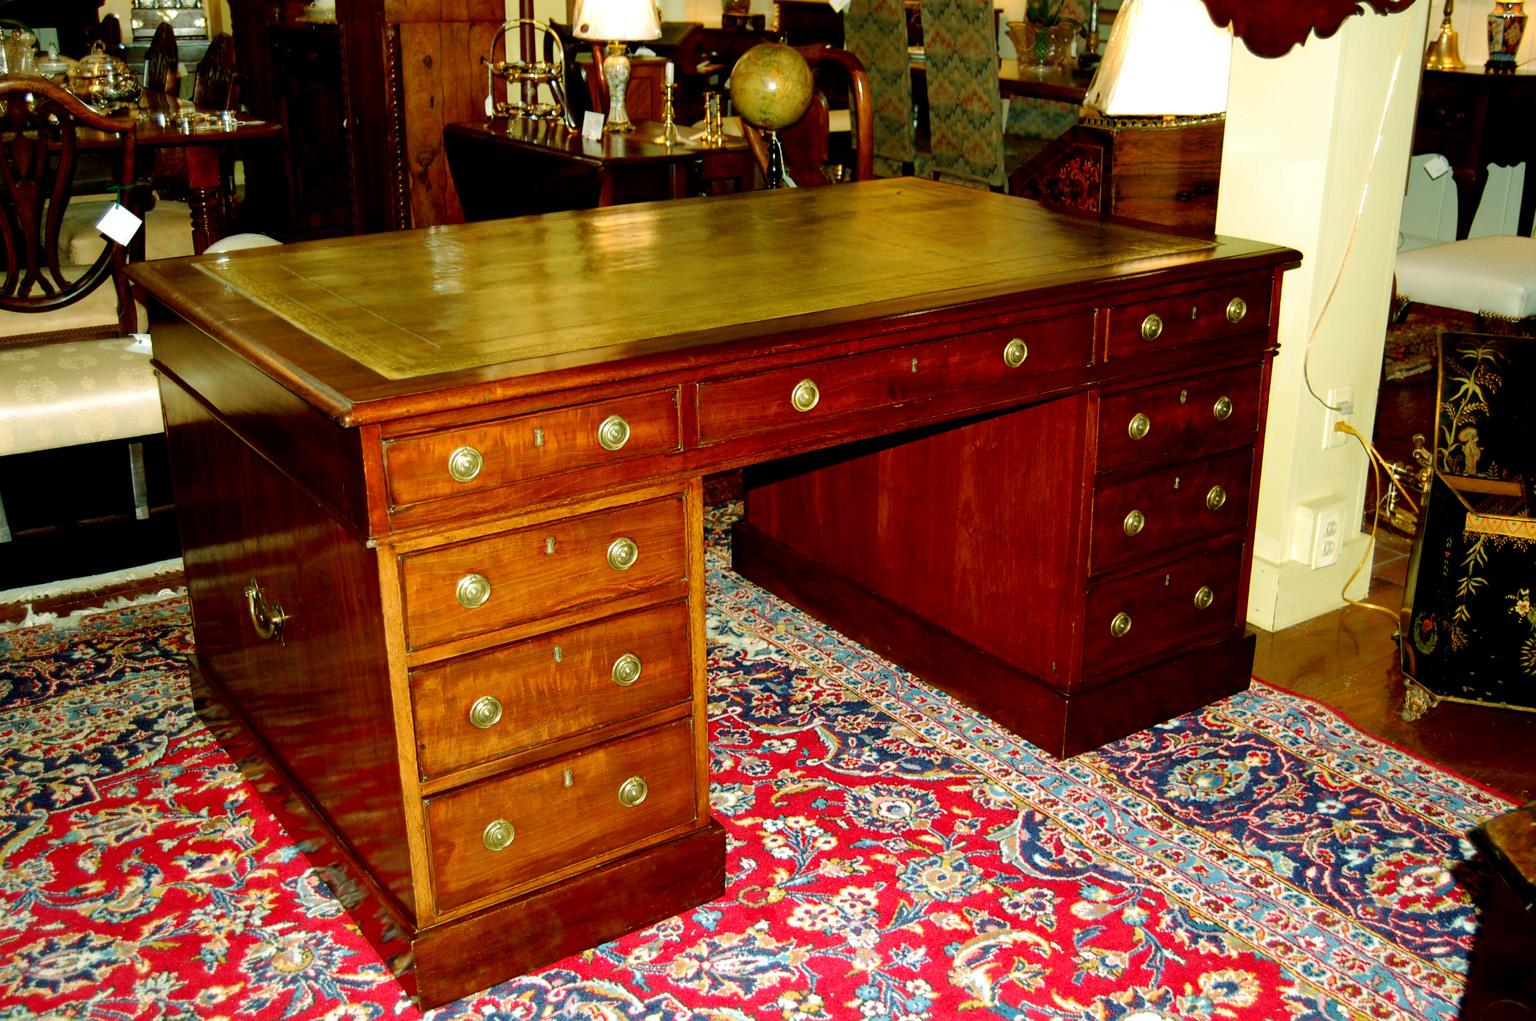 English mid 19th century mahogany pedestal partners desk with drawers and cupboards.  This classic partners desk comes in three parts, as most desks made in the earlier part of the 19th century did.  The top has three drawers on each long side. 